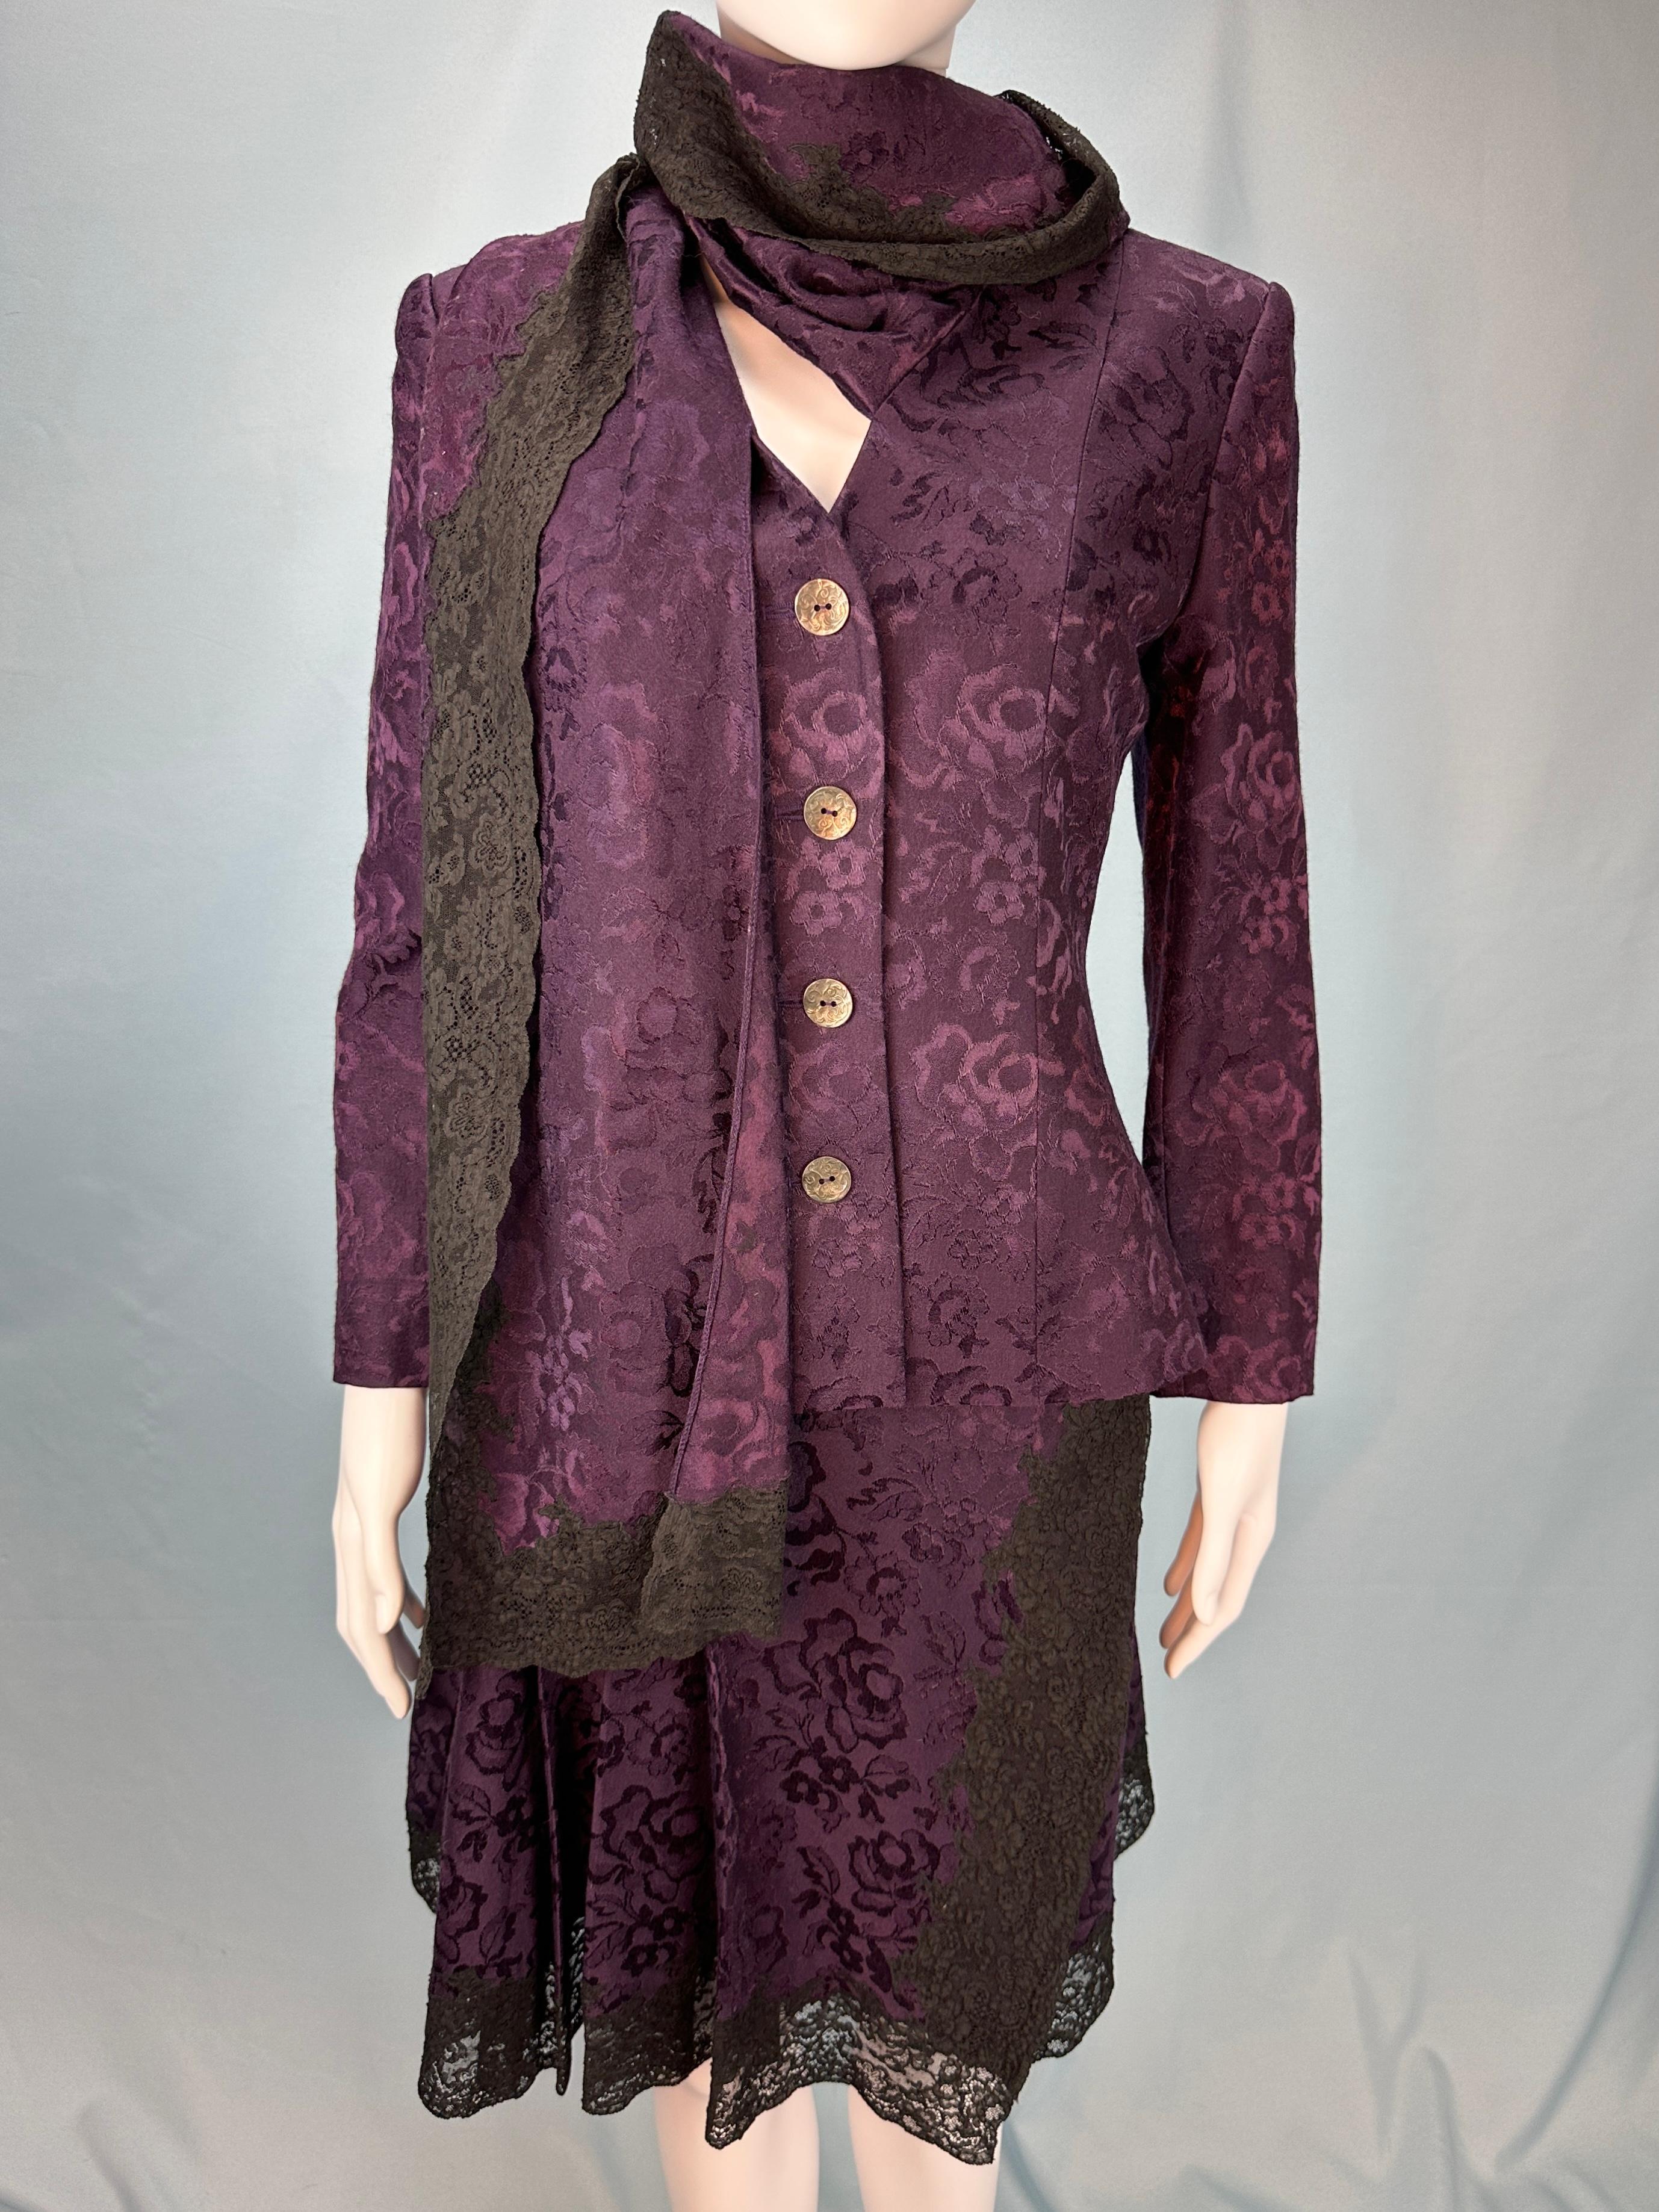 Dior Fall 1998 Purple Silk Brocade and Lace Skirt & Jacket Set For Sale 2